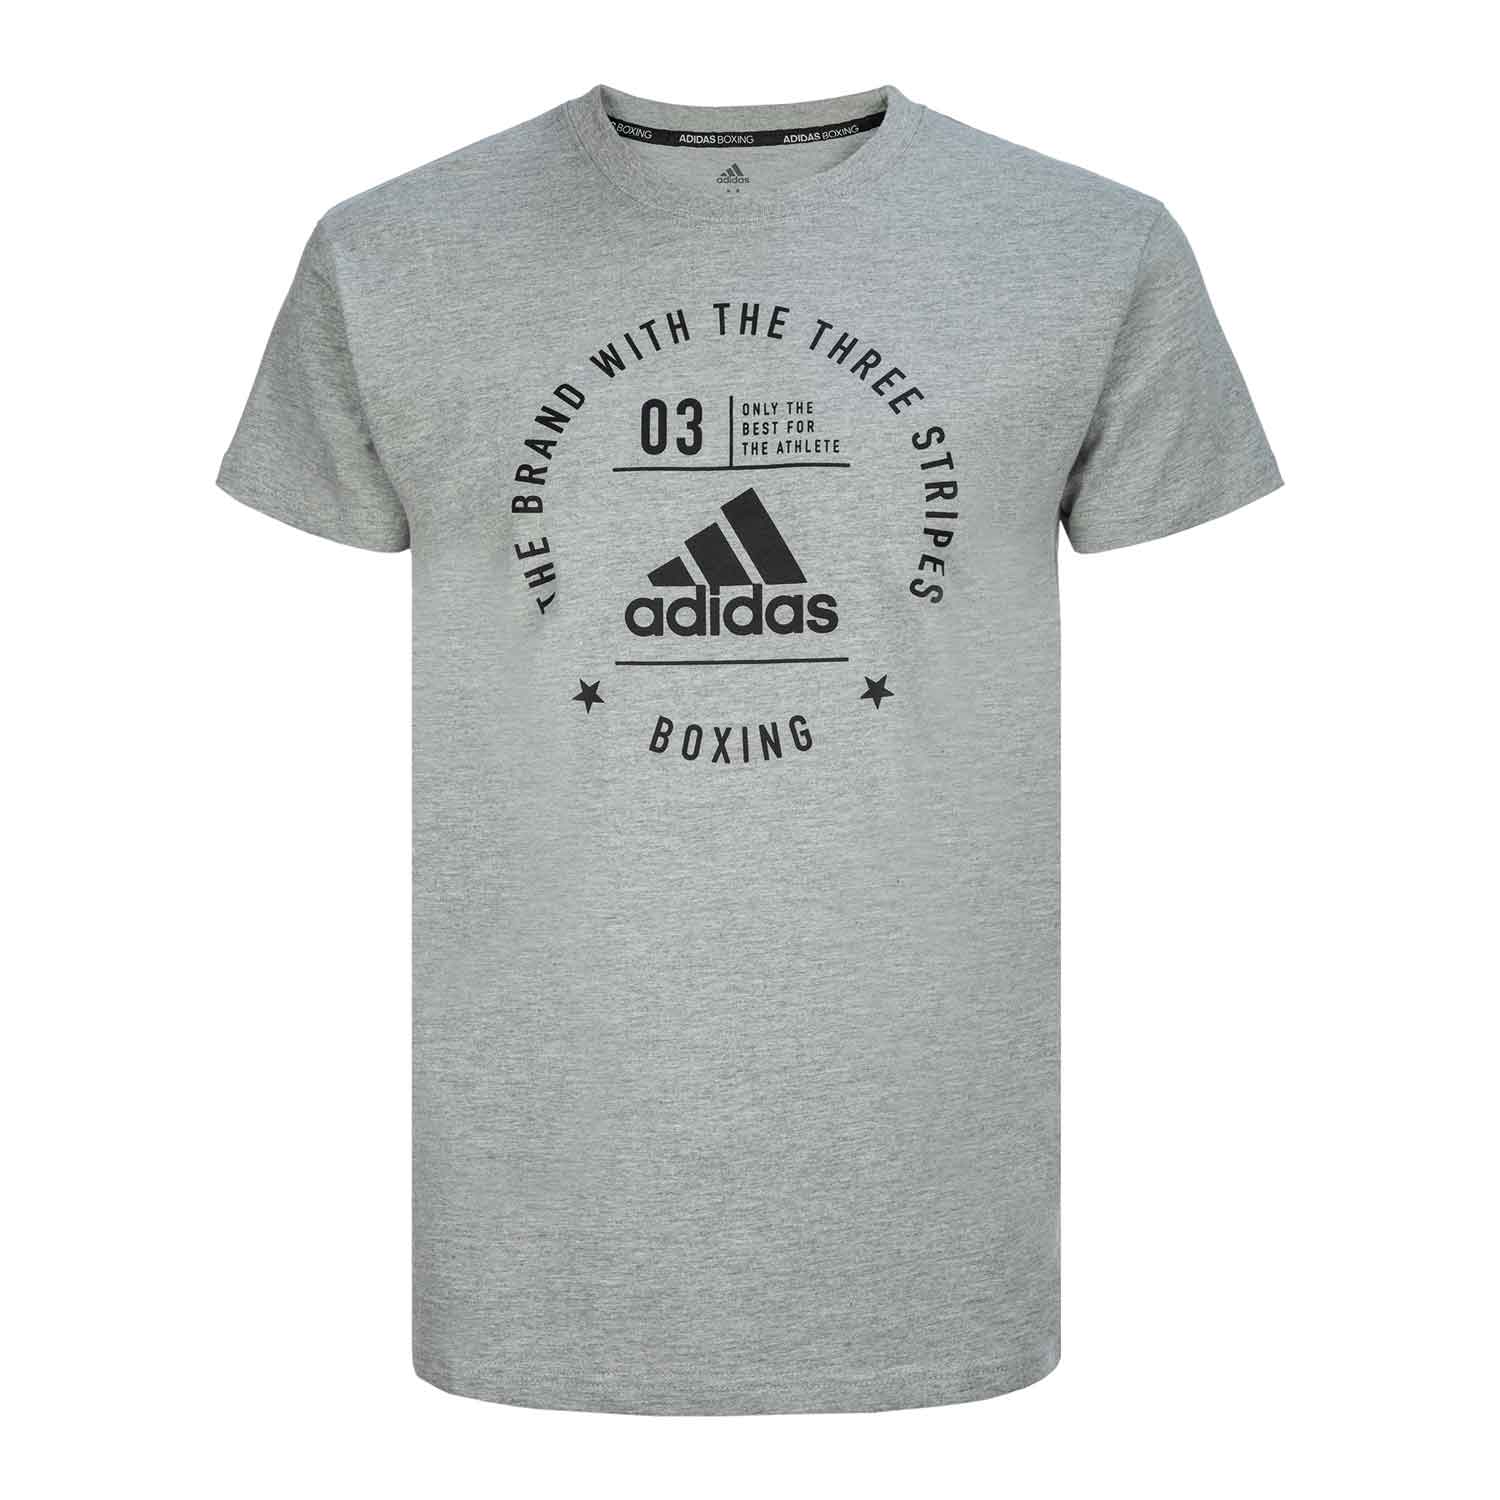 Футболка The Brand With The Three Stripes T-Shirt Boxing серо-черная (размер S)